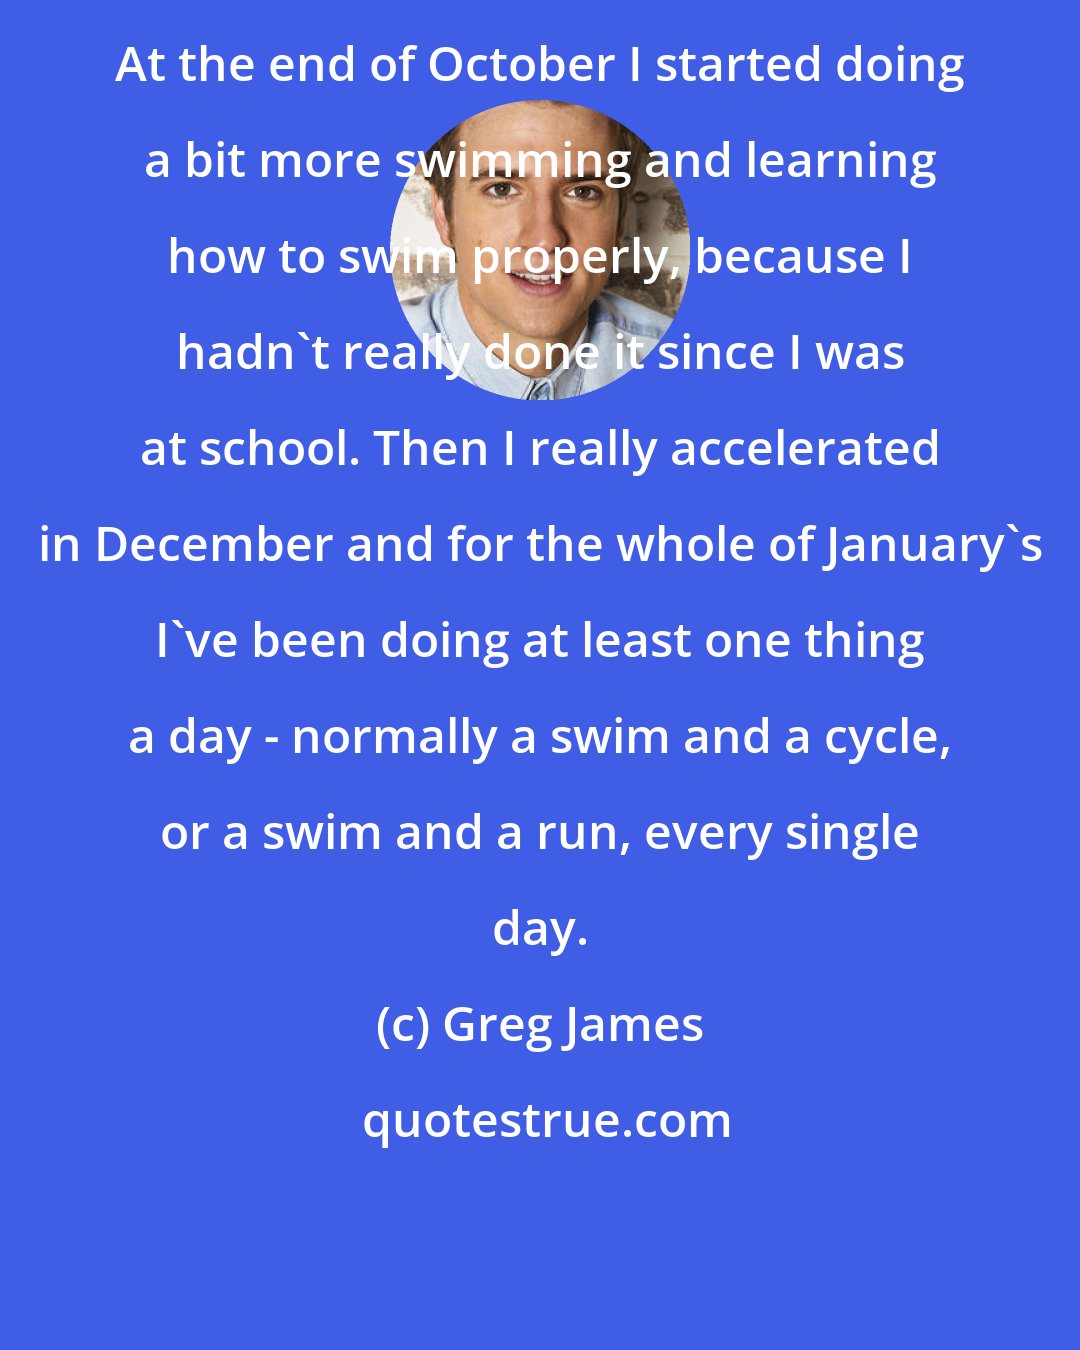 Greg James: At the end of October I started doing a bit more swimming and learning how to swim properly, because I hadn't really done it since I was at school. Then I really accelerated in December and for the whole of January's I've been doing at least one thing a day - normally a swim and a cycle, or a swim and a run, every single day.